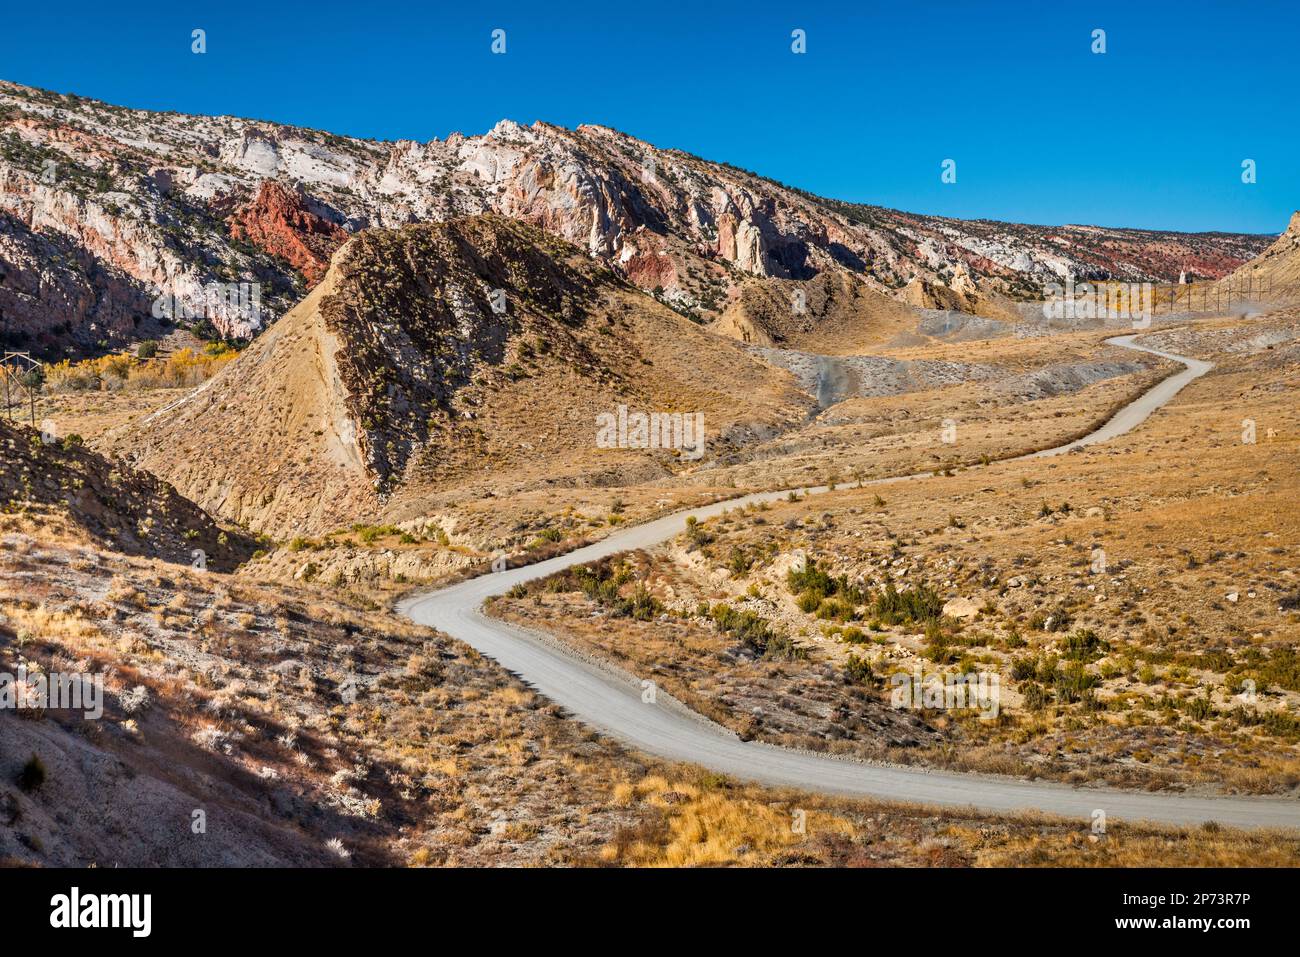 The Cockscomb monocline, Cottonwood Road in Cottonwood Canyon, Grand Staircase Escalante National Monument, Utah, USA Stock Photo